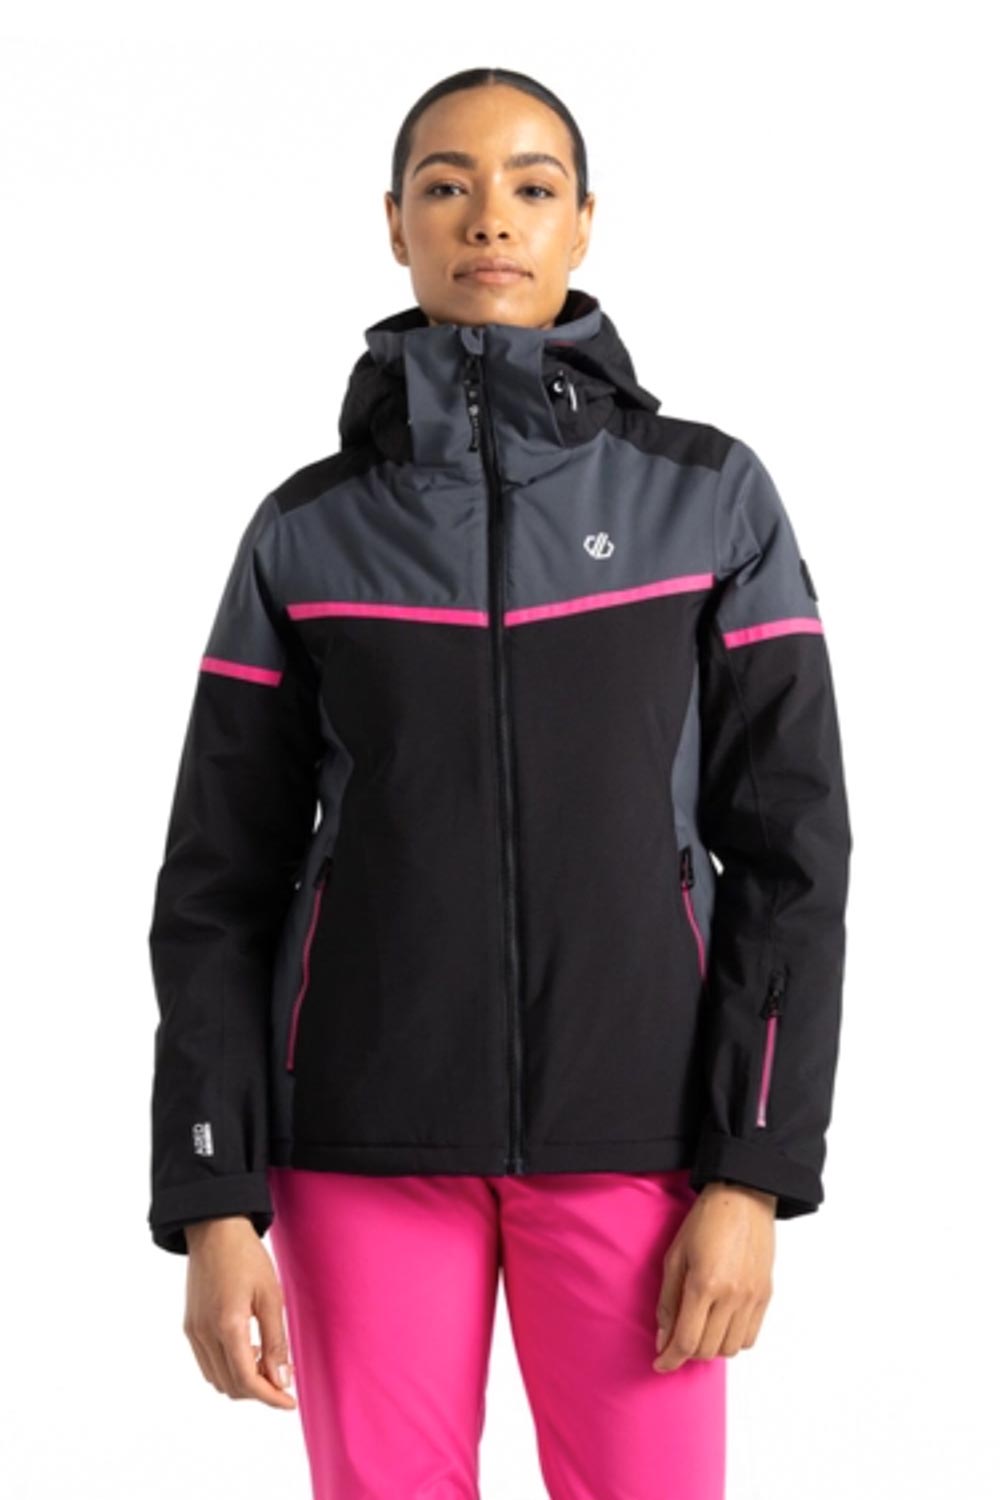 women's ski jacket, black & gray with pink accents